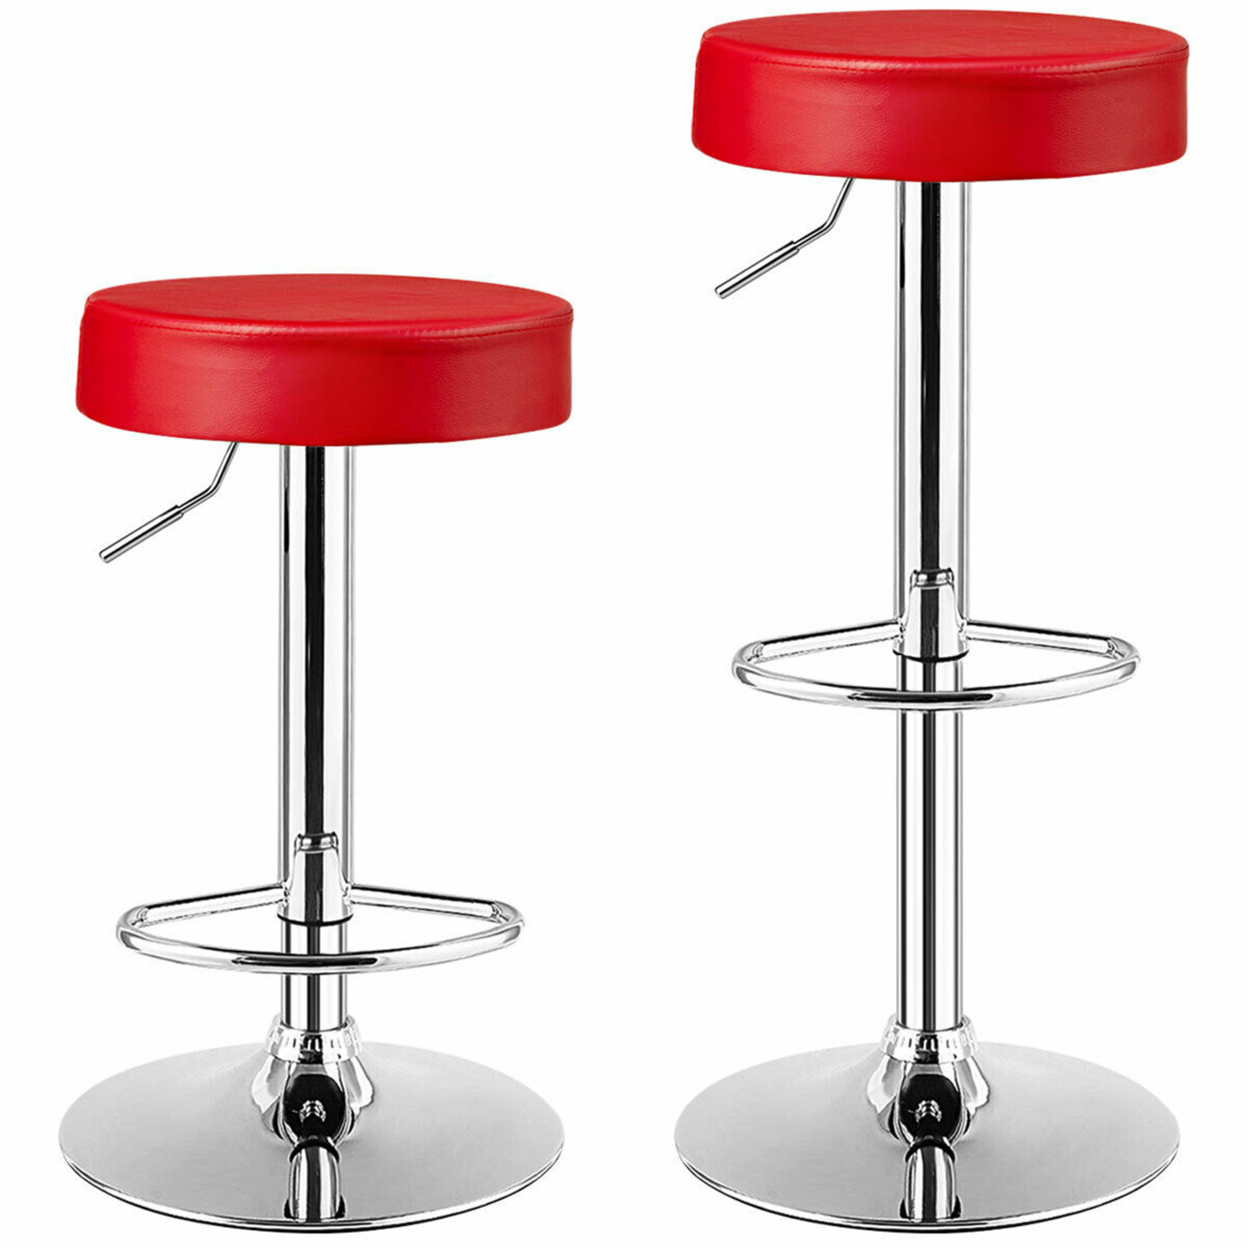 2PCS Adjustable Swivel Bar Stool PU Leather Kitchen Counter Bar Chairs Red